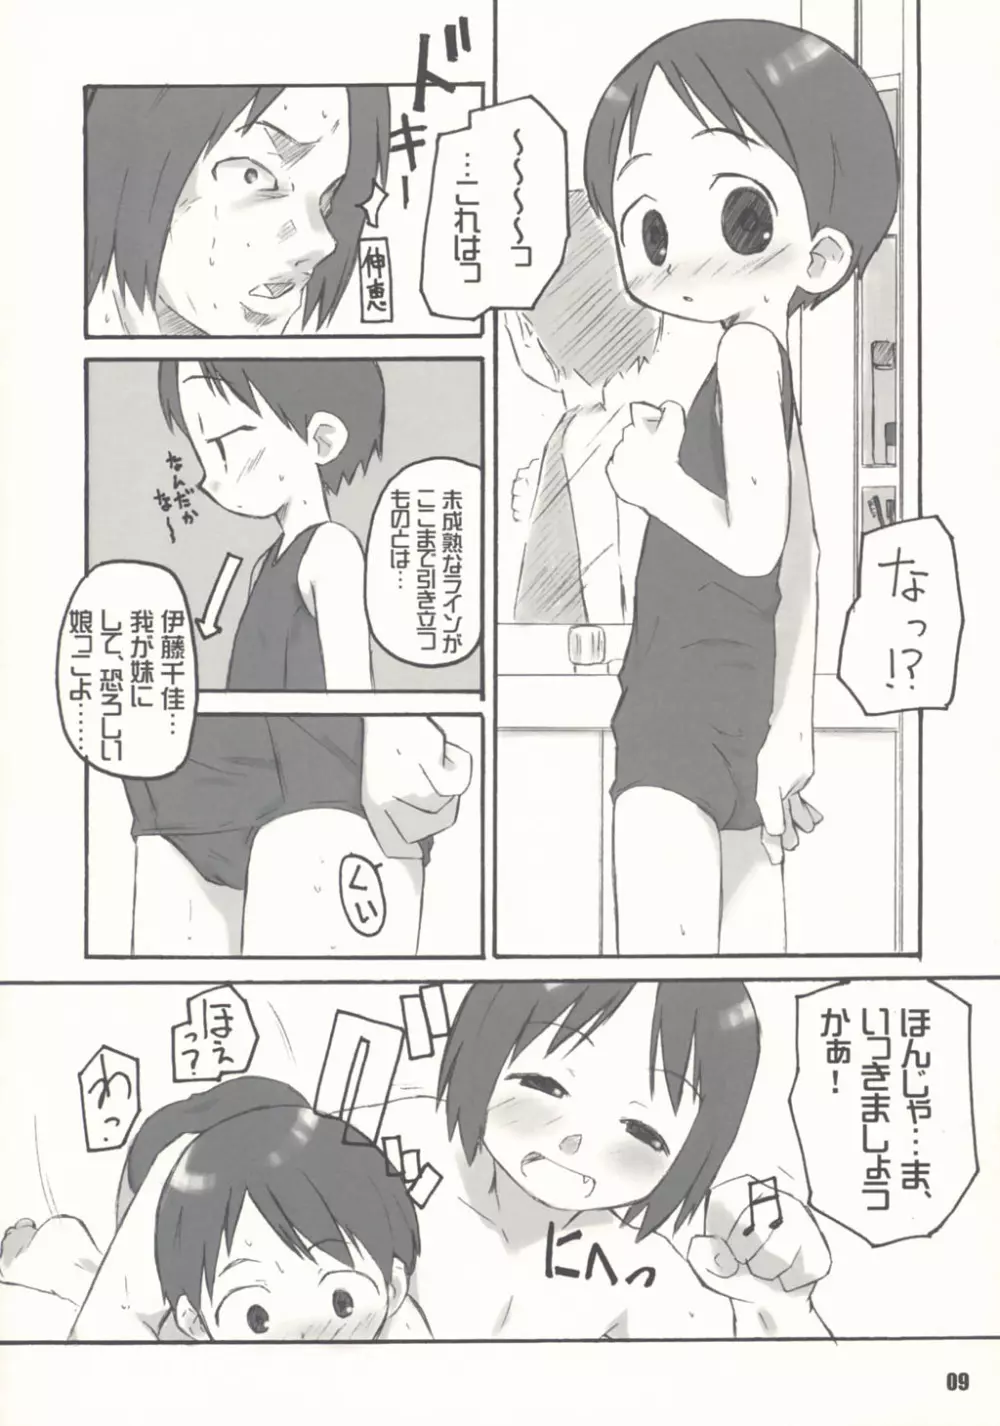 SCHOOLY MIEZY 完全版 - page8